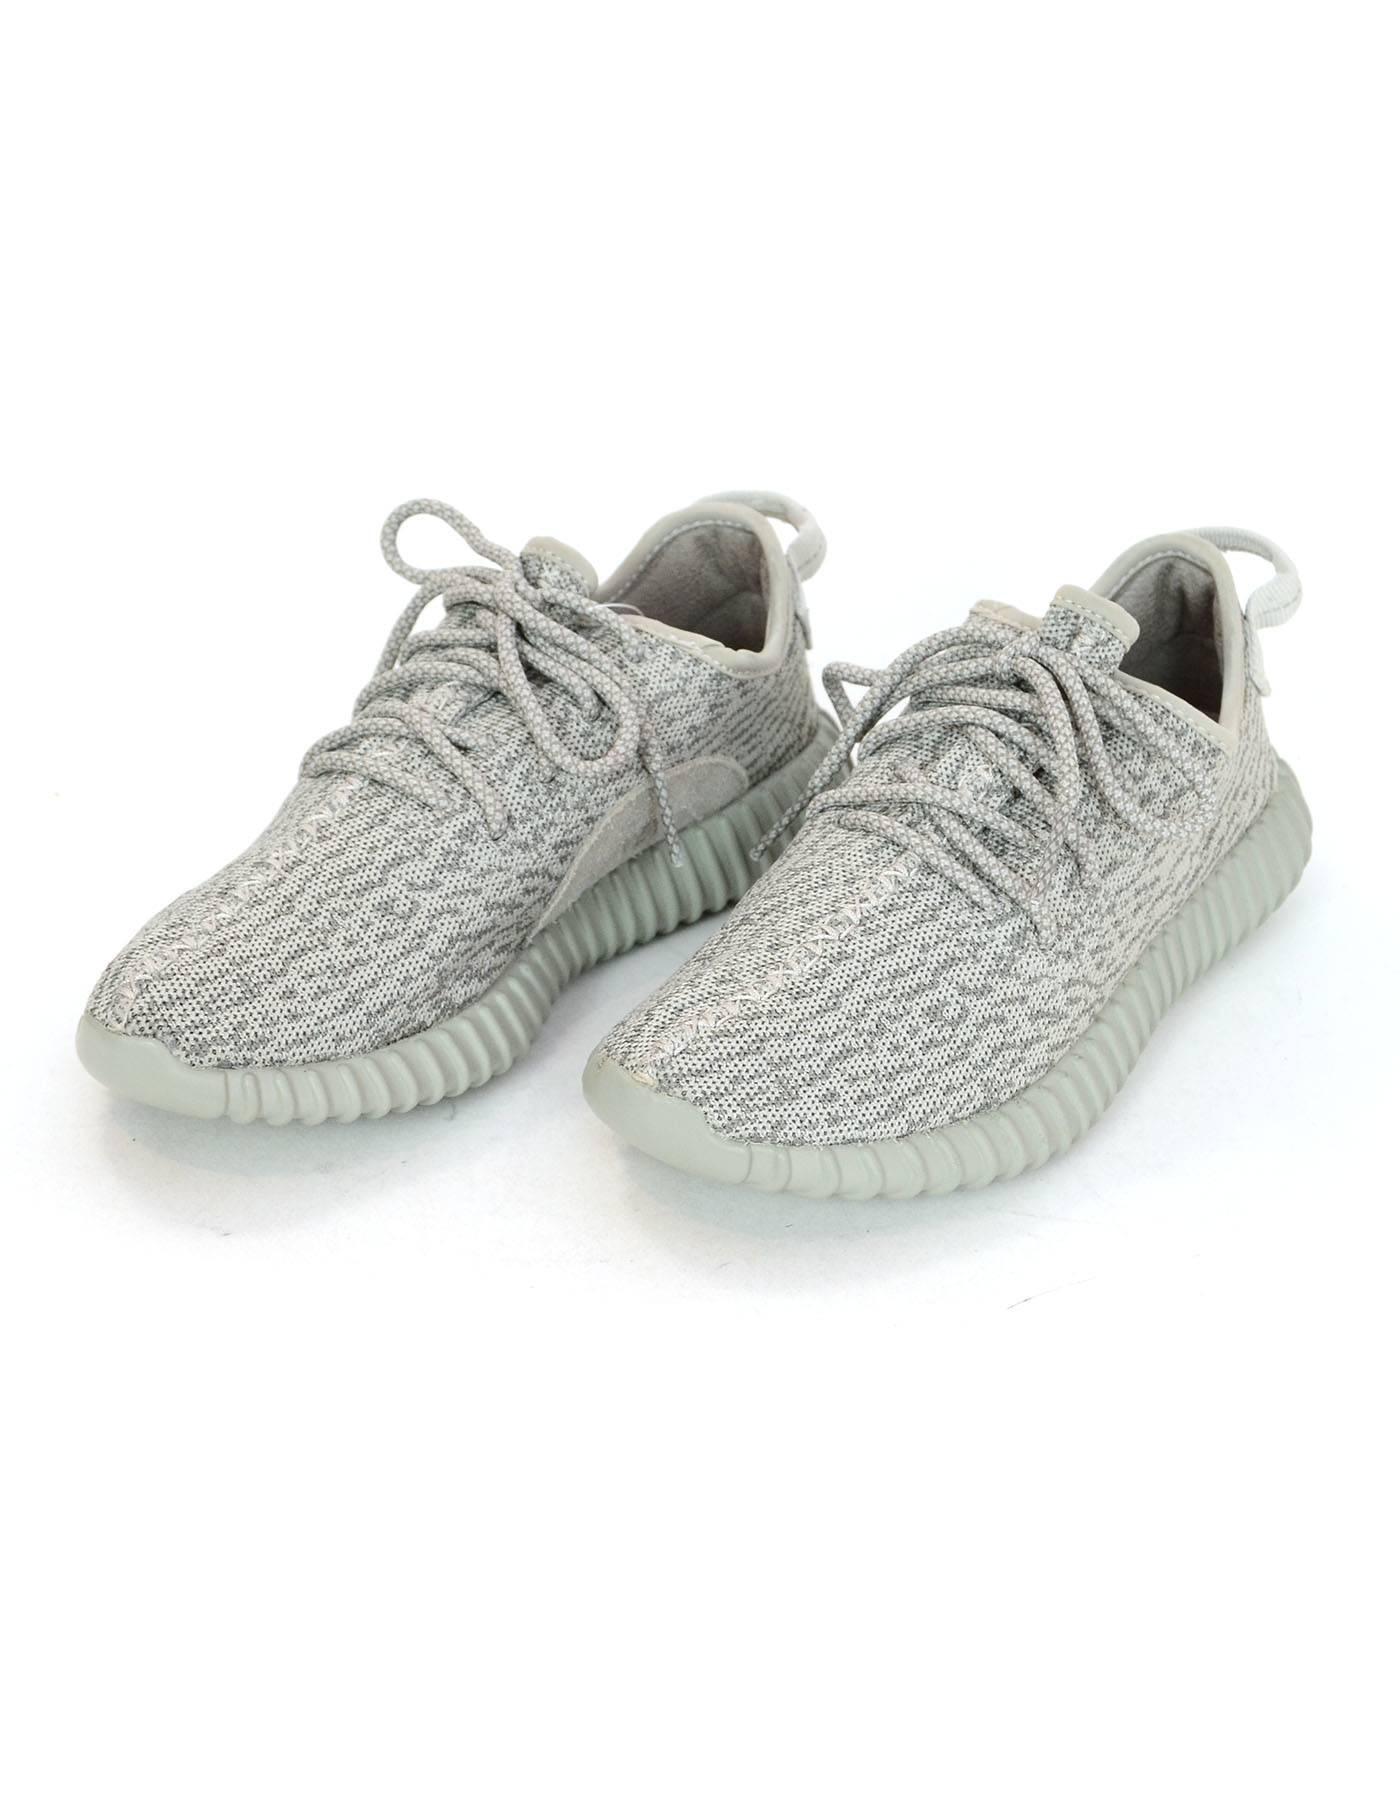 Adidas x Kanye West Yeezy Boost 350 Moonrock Sneakers Men's Sz 6.5

Made In: China
Color: Moonrock / grey
Materials: Canvas, rubber
Closure/Opening: Lace tie closure
Sole Stamp: Adidas x Yeezy
Overall Condition: Excellent pre-owned condition, very